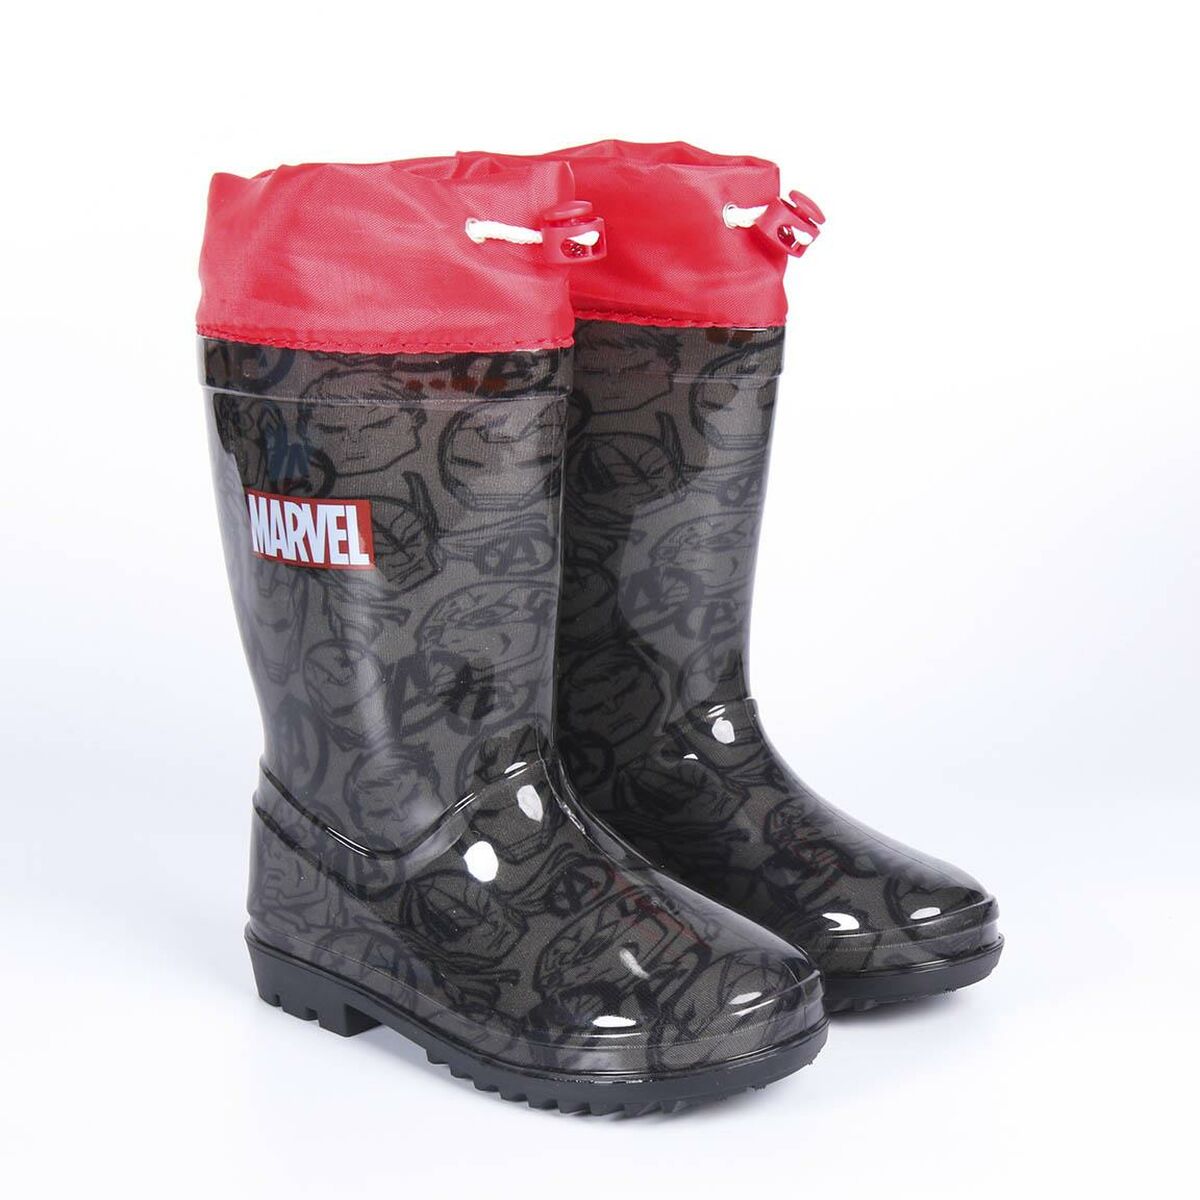 Children's Water Boots The Avengers Black